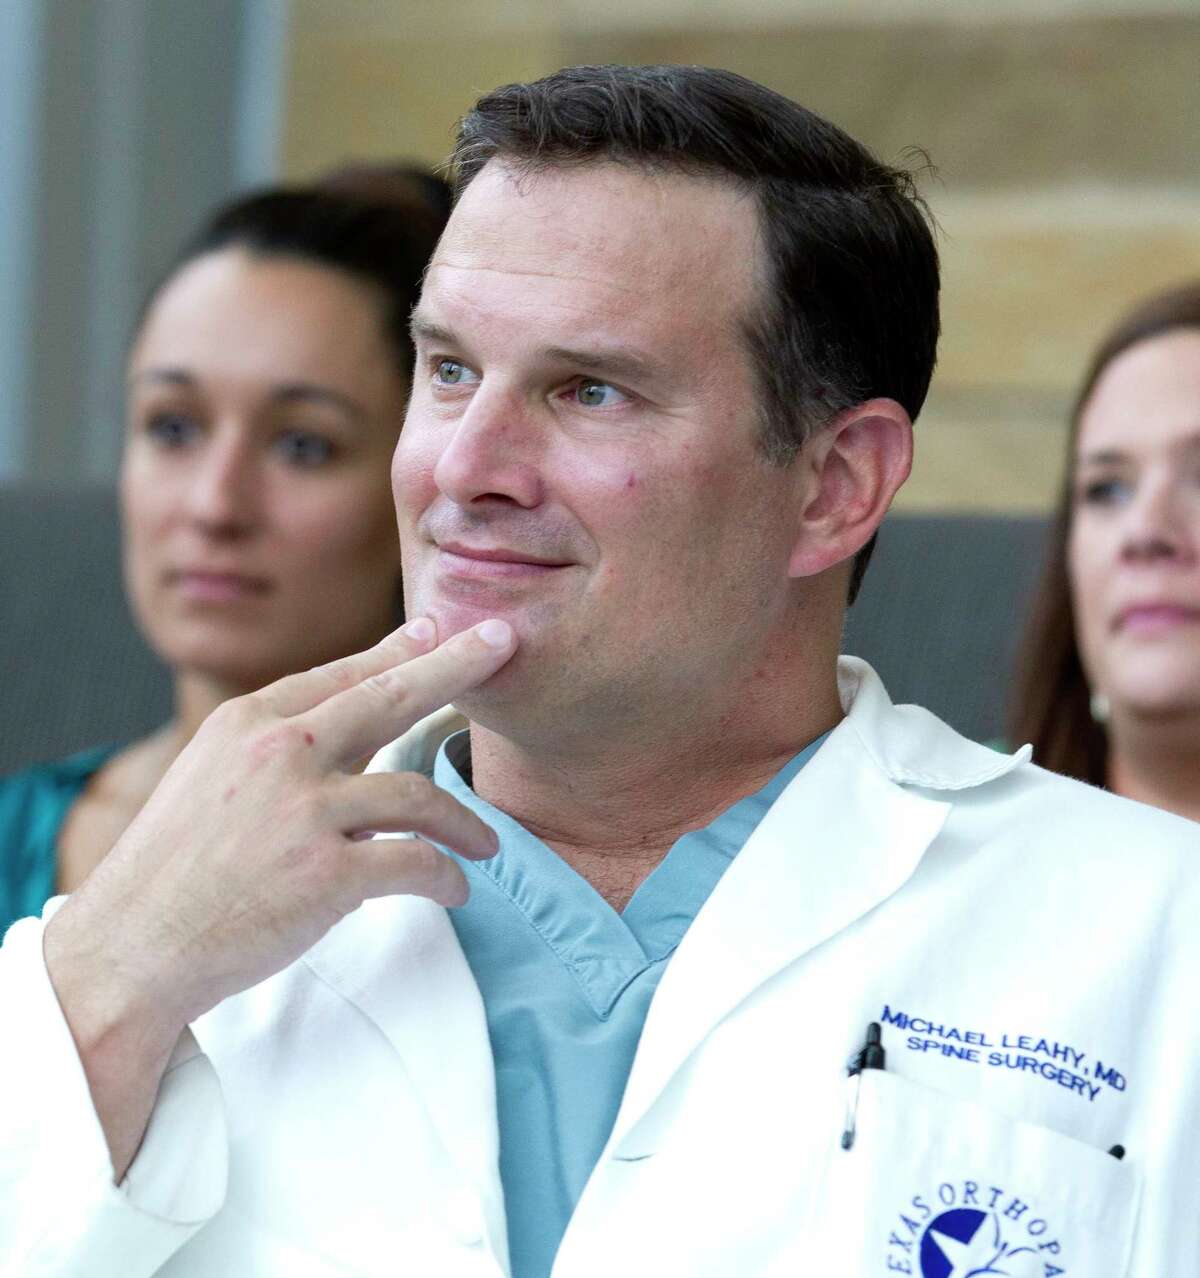 Doctor Mike Leahy, a local spine surgeon, is seen during a reception with friends, family and hospital staff at CHI St. LukeÂ?’s Lakeside Hospital, Tuesday, July 18, 2017, in The Woodlands. Spinal Elements created a $125,000 endowment in honor of LeahyÂ?’s efforts through the company's Be a Hero program.